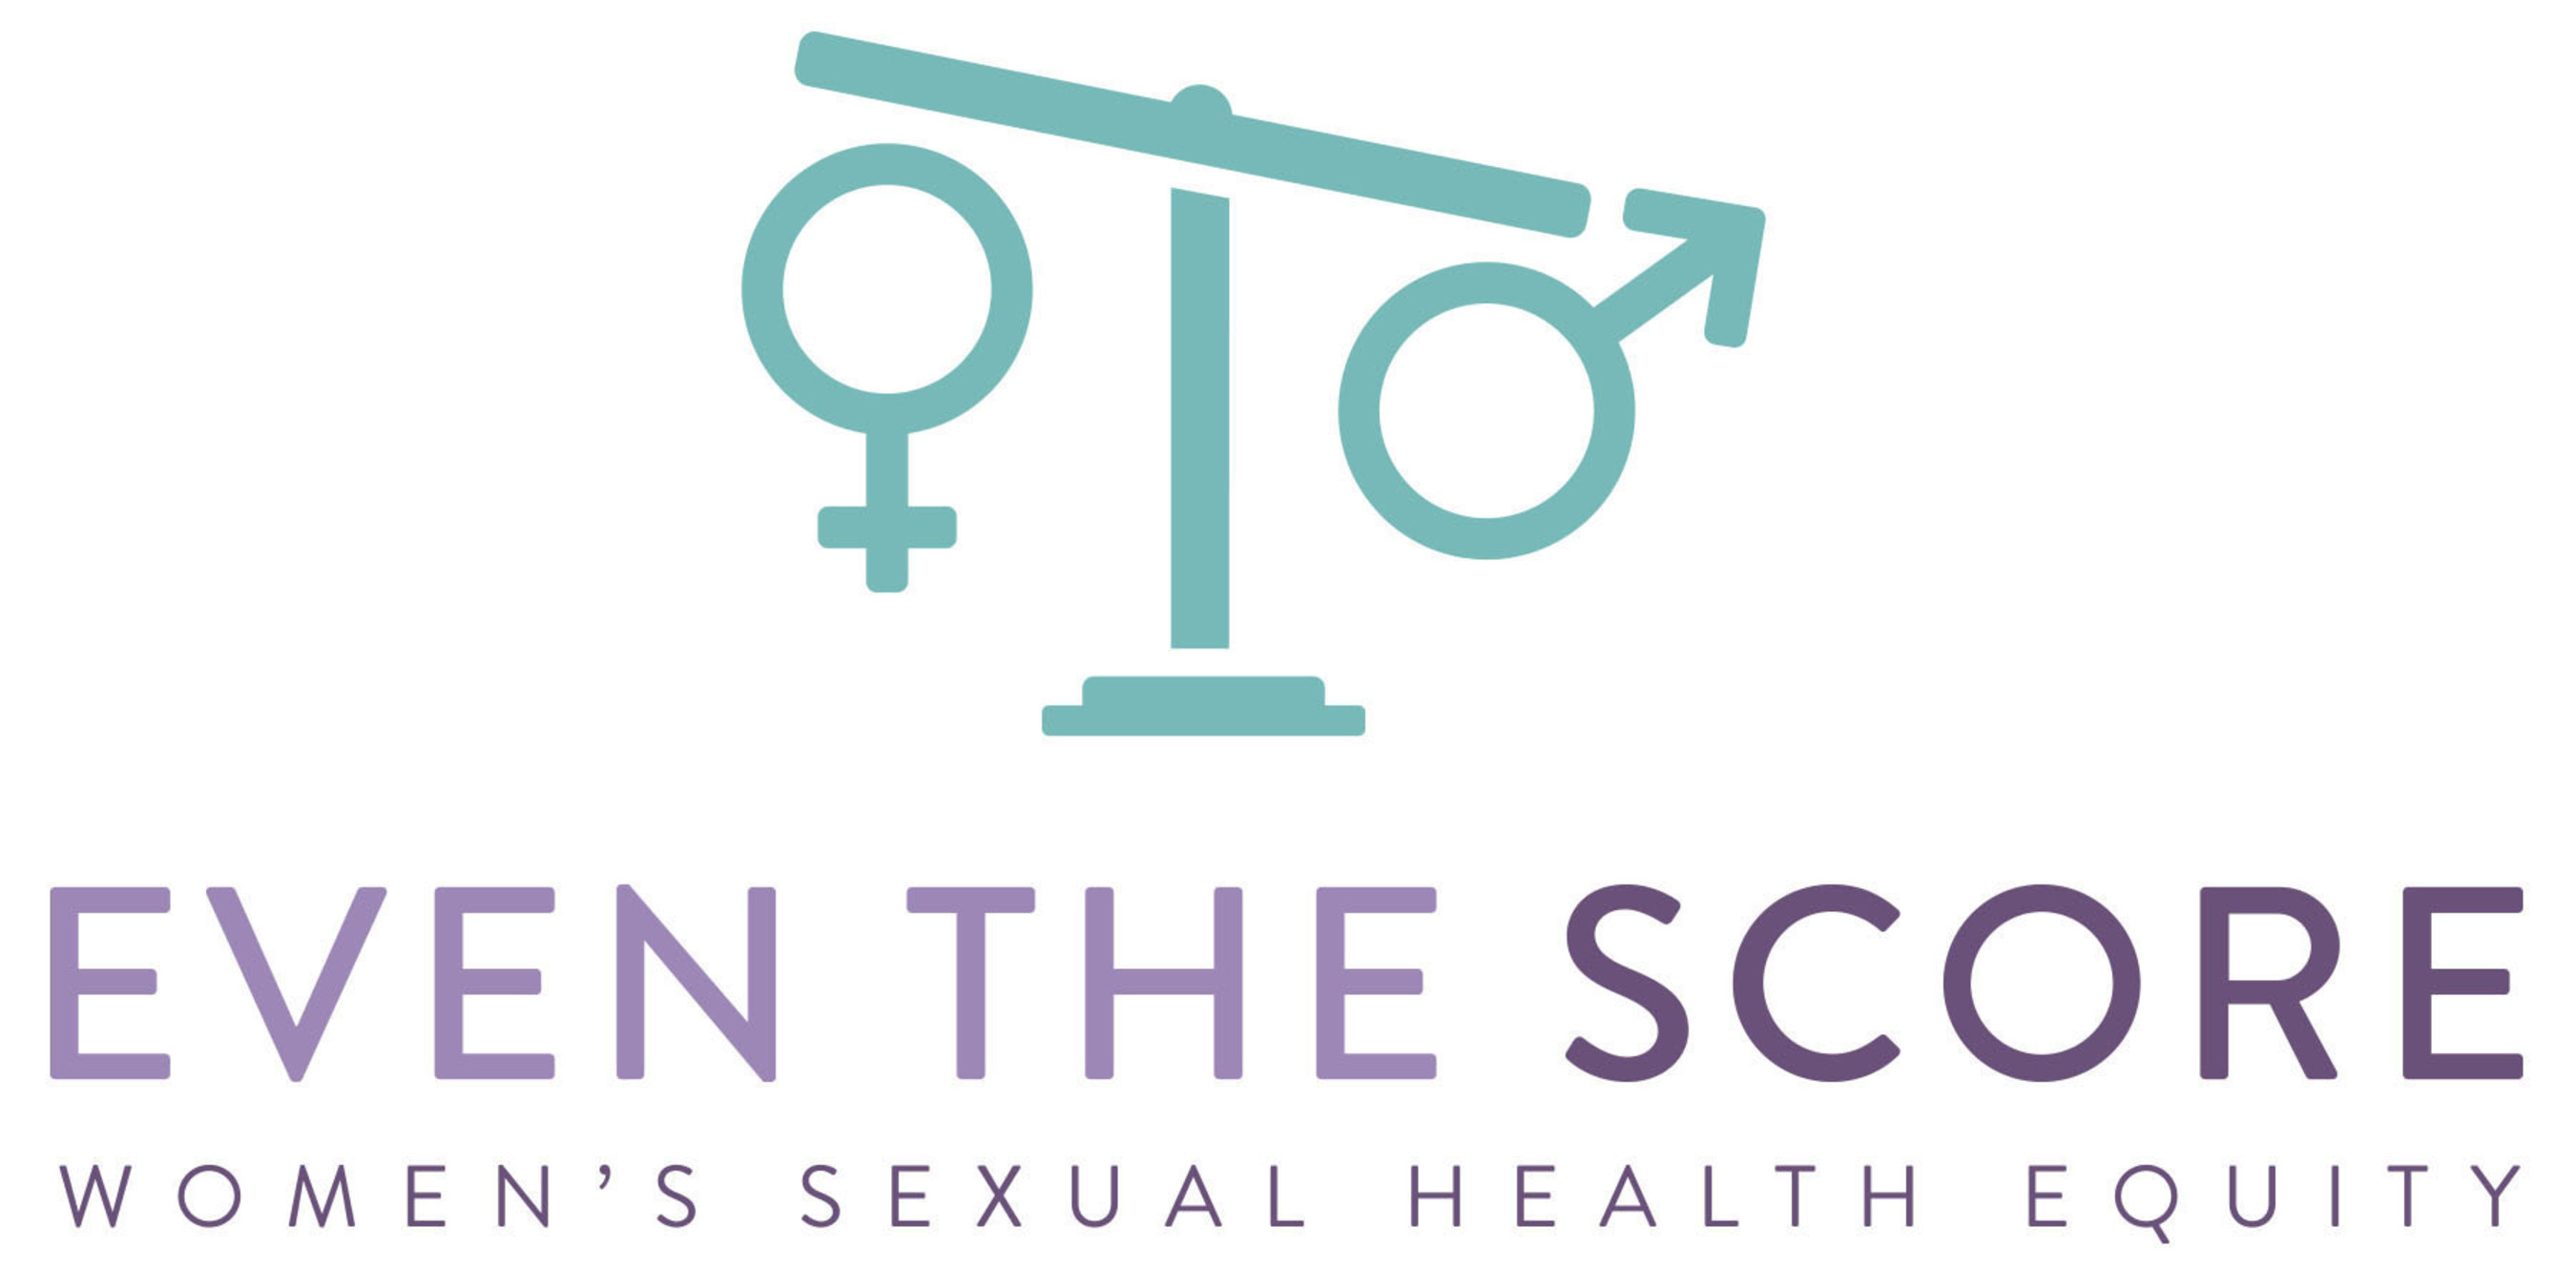 Even the Score: A Campaign for Women's Sexual Health Equity